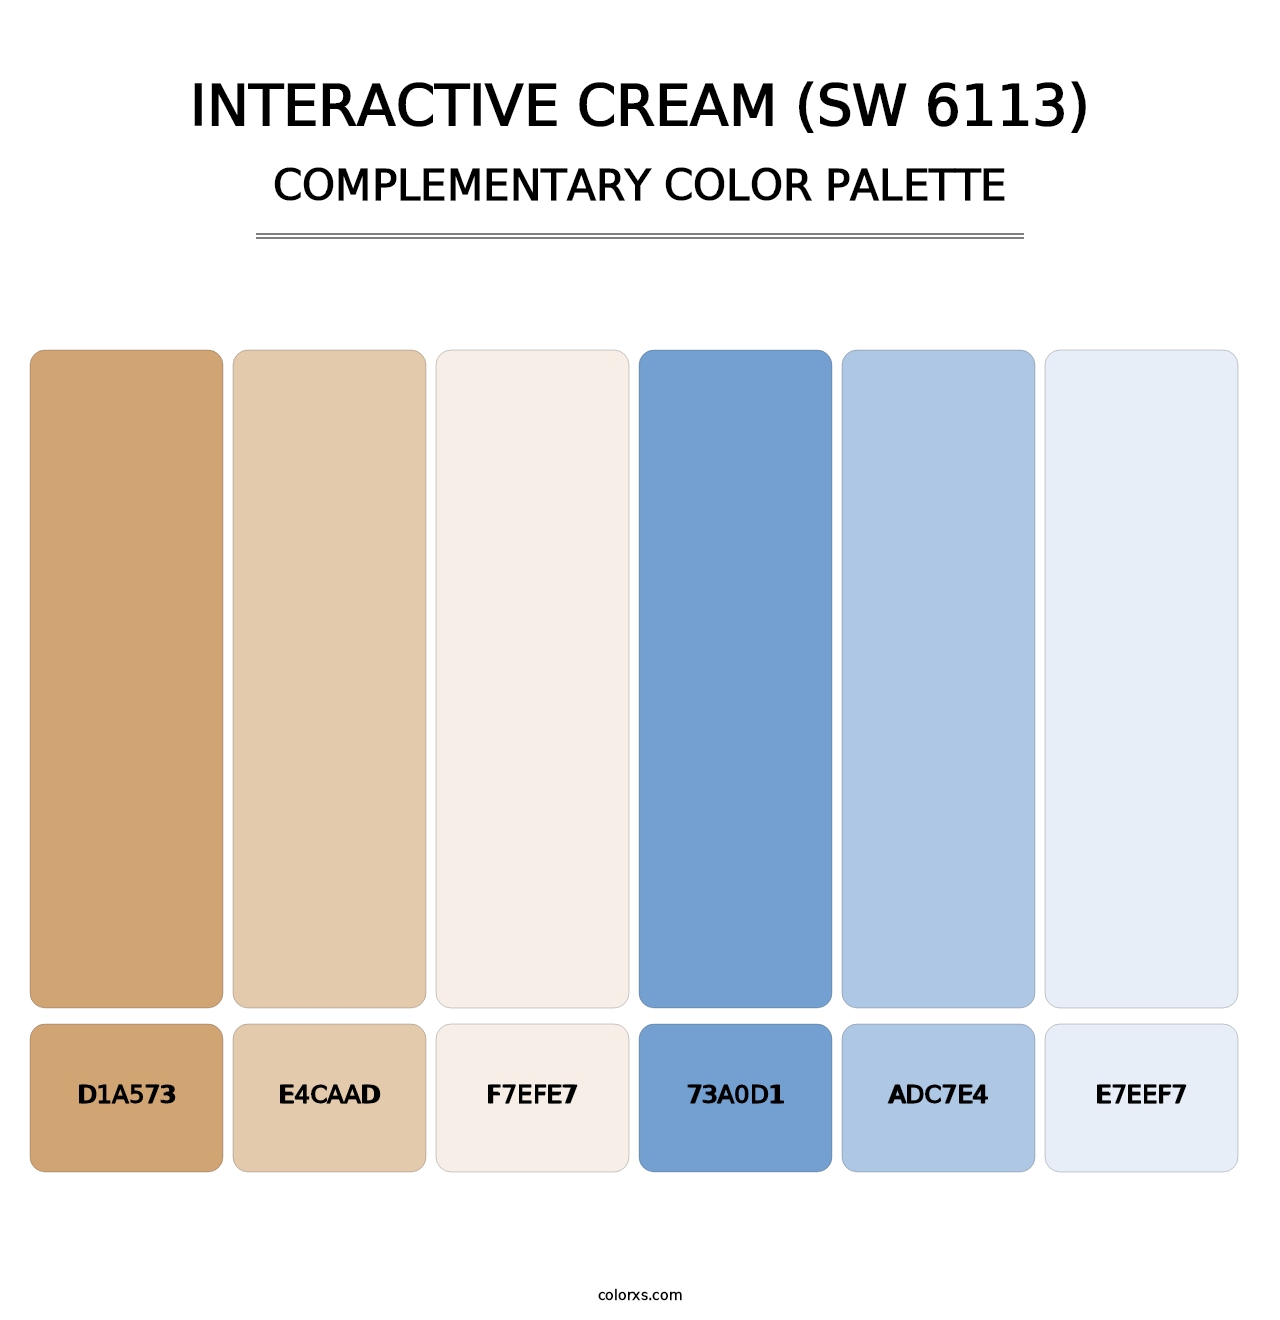 Interactive Cream (SW 6113) - Complementary Color Palette